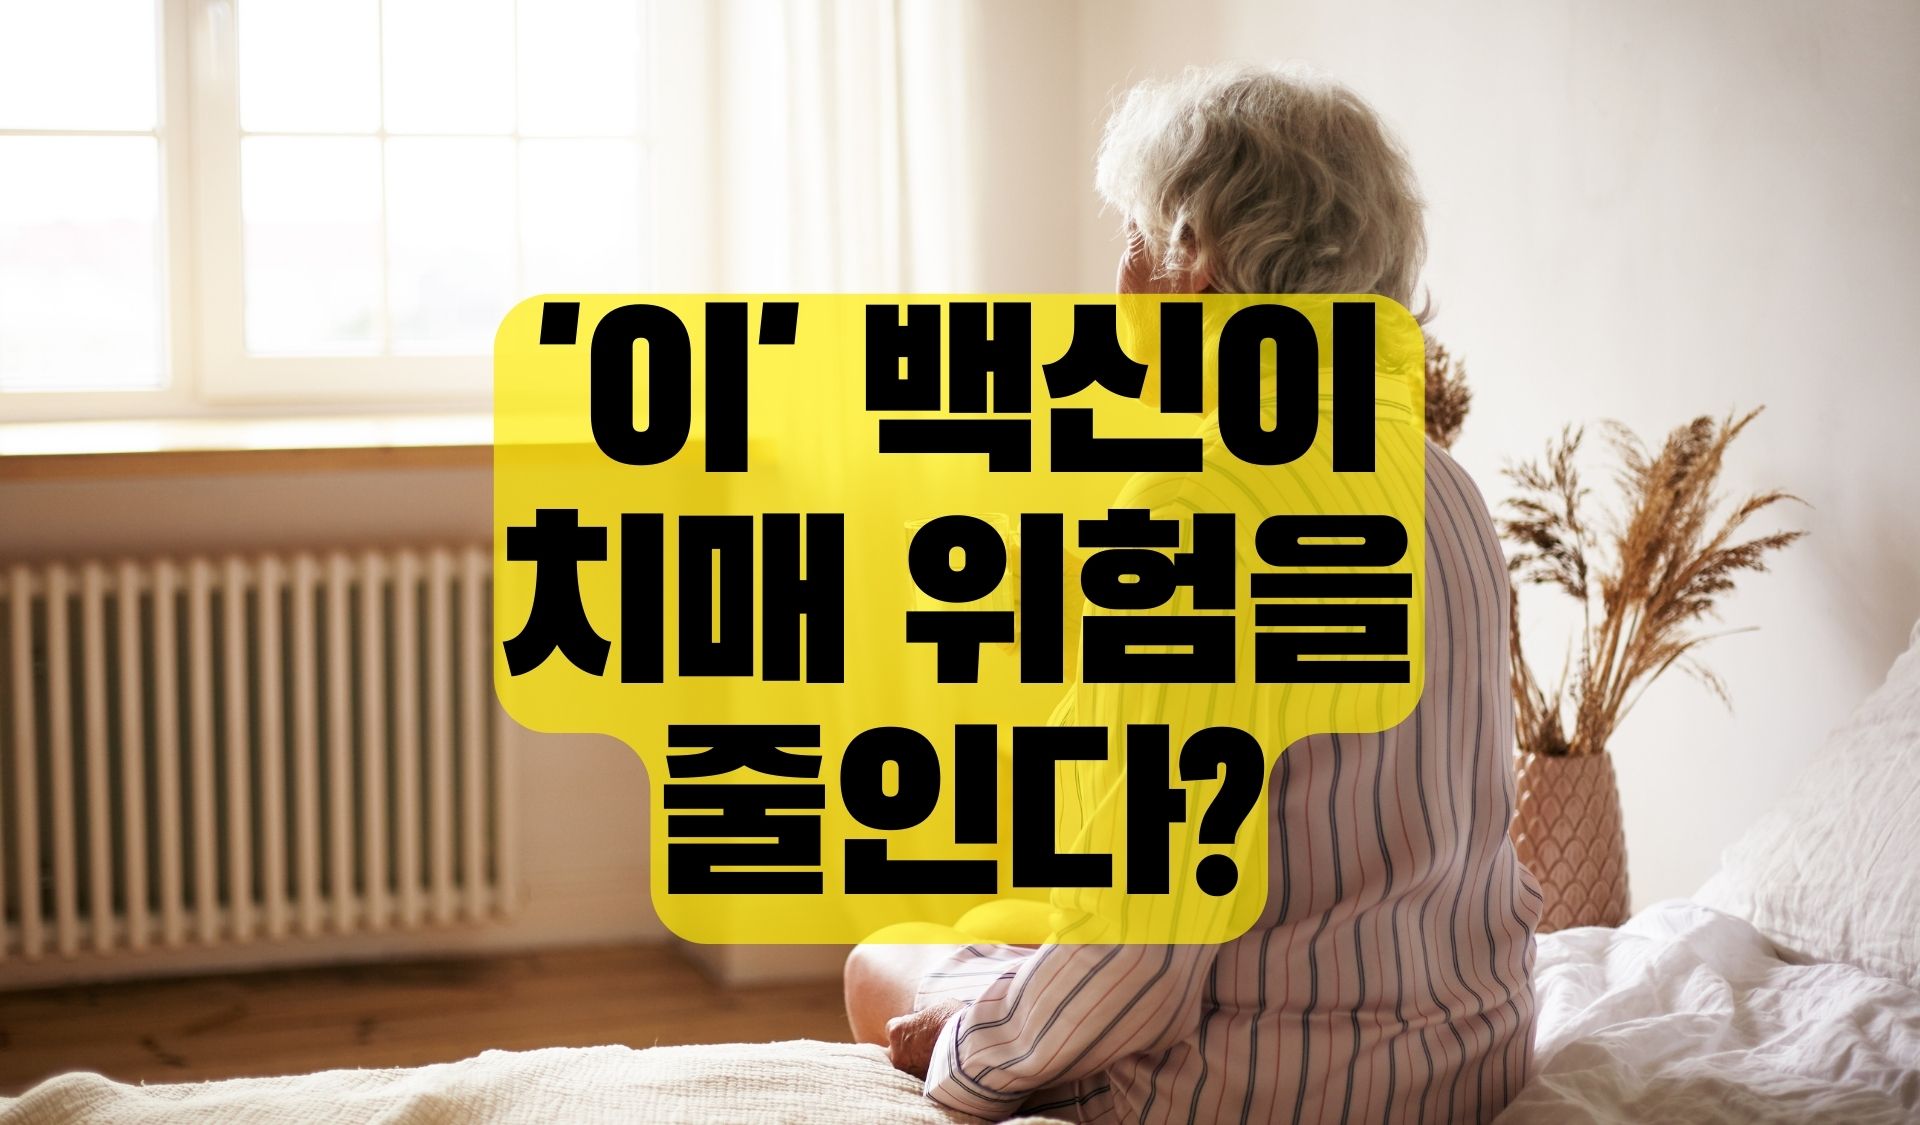 Read more about the article ‘이’ 백신이 치매 위험을 줄인다?